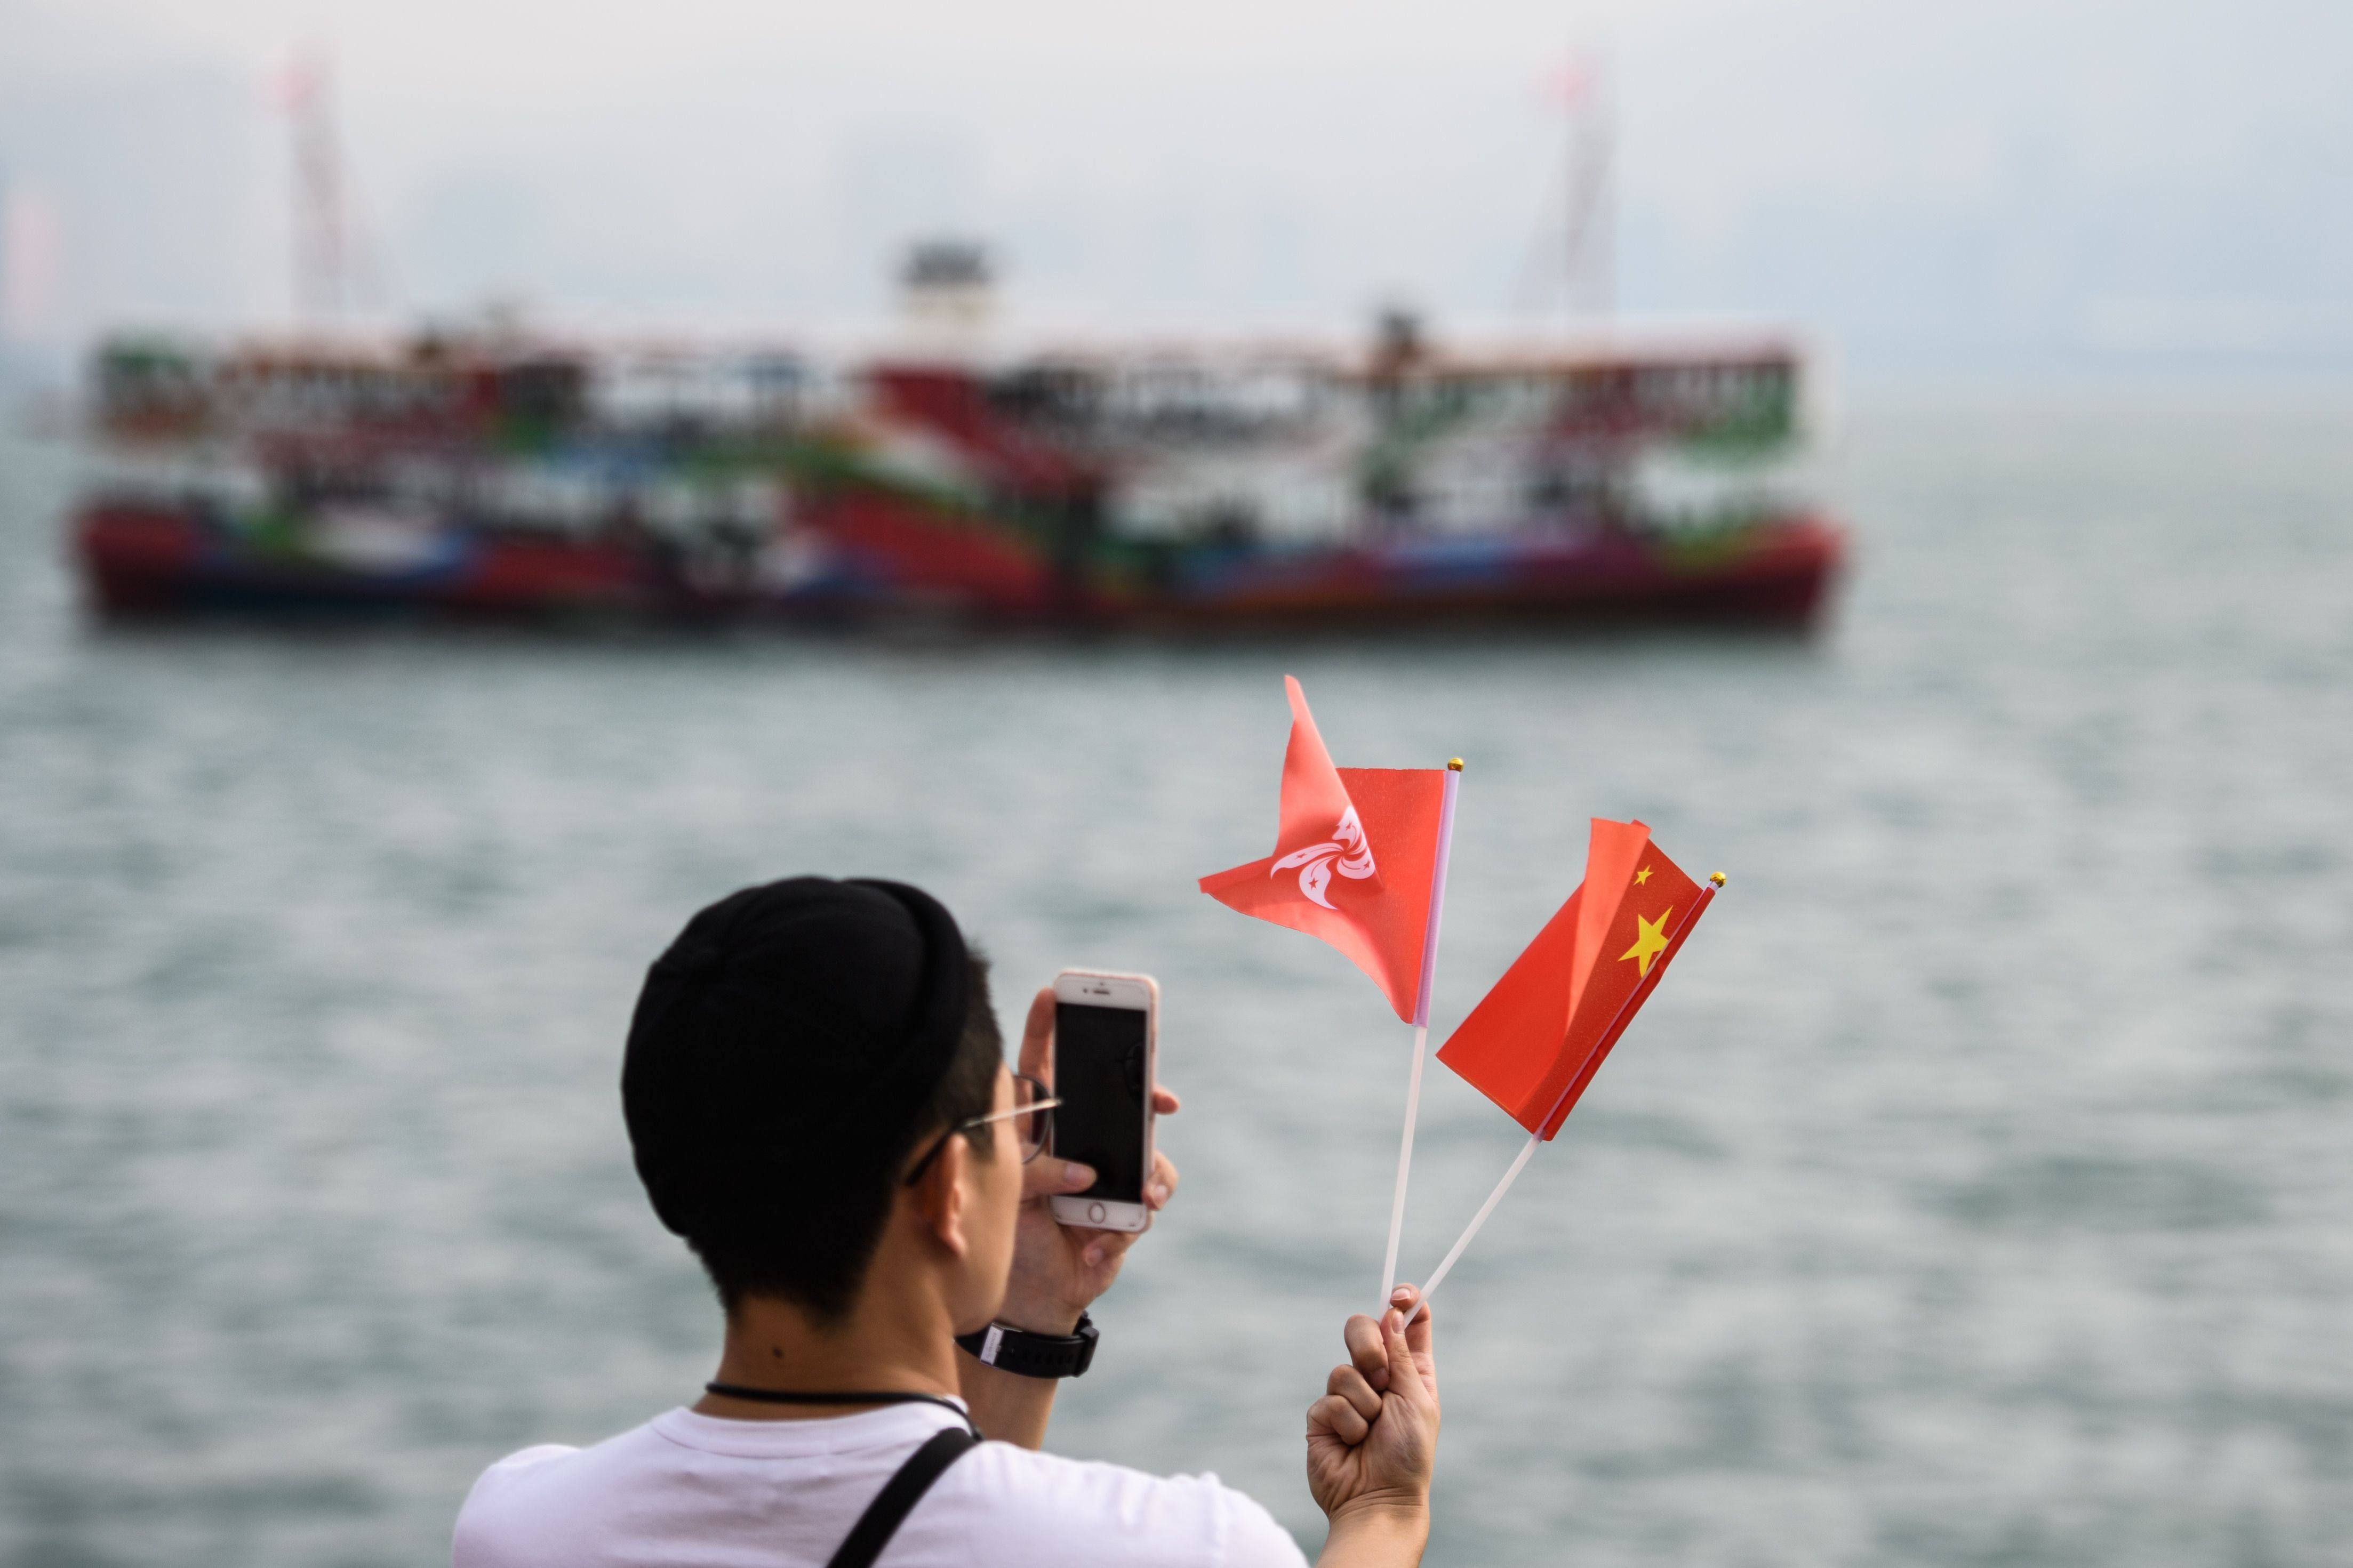 A man takes a photo of the Hong Kong and China flags as a Star Ferry sails past during National Day celebrations in Hong Kong on October 1, 2018. Photo: AFP